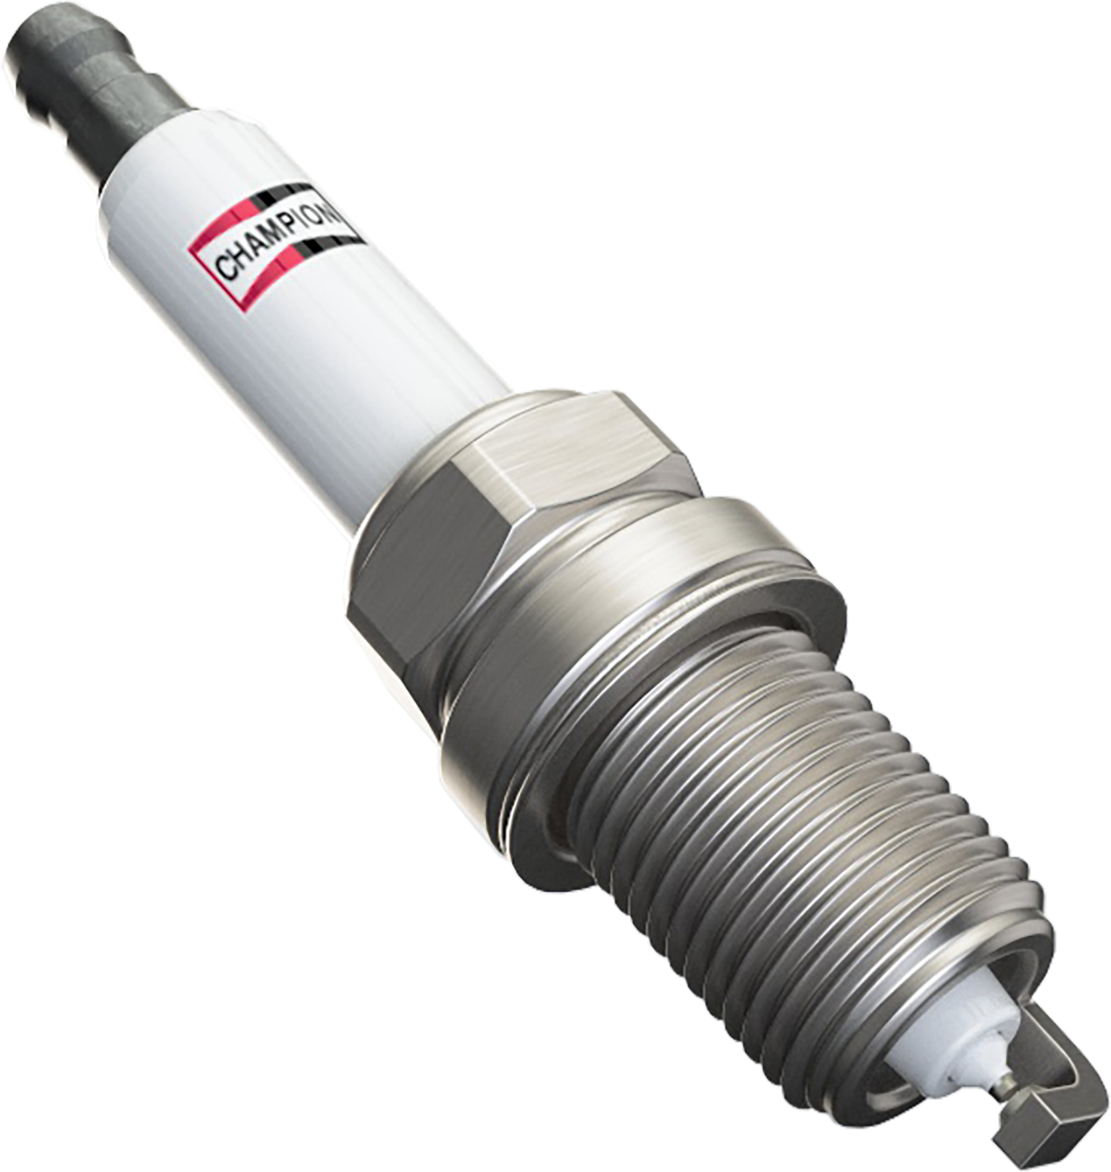 Tenneco´s Powertrain business group is launching a range of new Champion industrial spark plugs for the aftermarket which enable long life and increase service intervals for stationary and heavy-duty on- and off-road applications. ​ The newly designed double Iridium M14 J-Gap high performance spark plugs with HEX16mm feature an advanced ceramic formula for improved electrical and mechanical strength. They are offered with two different nominal electrode gaps: 0.25mm for stationary usage with biogas and 0.40mm for natural gas commercial truck, bus, and construction machinery applications. ​ © 2022 Tenneco Inc.